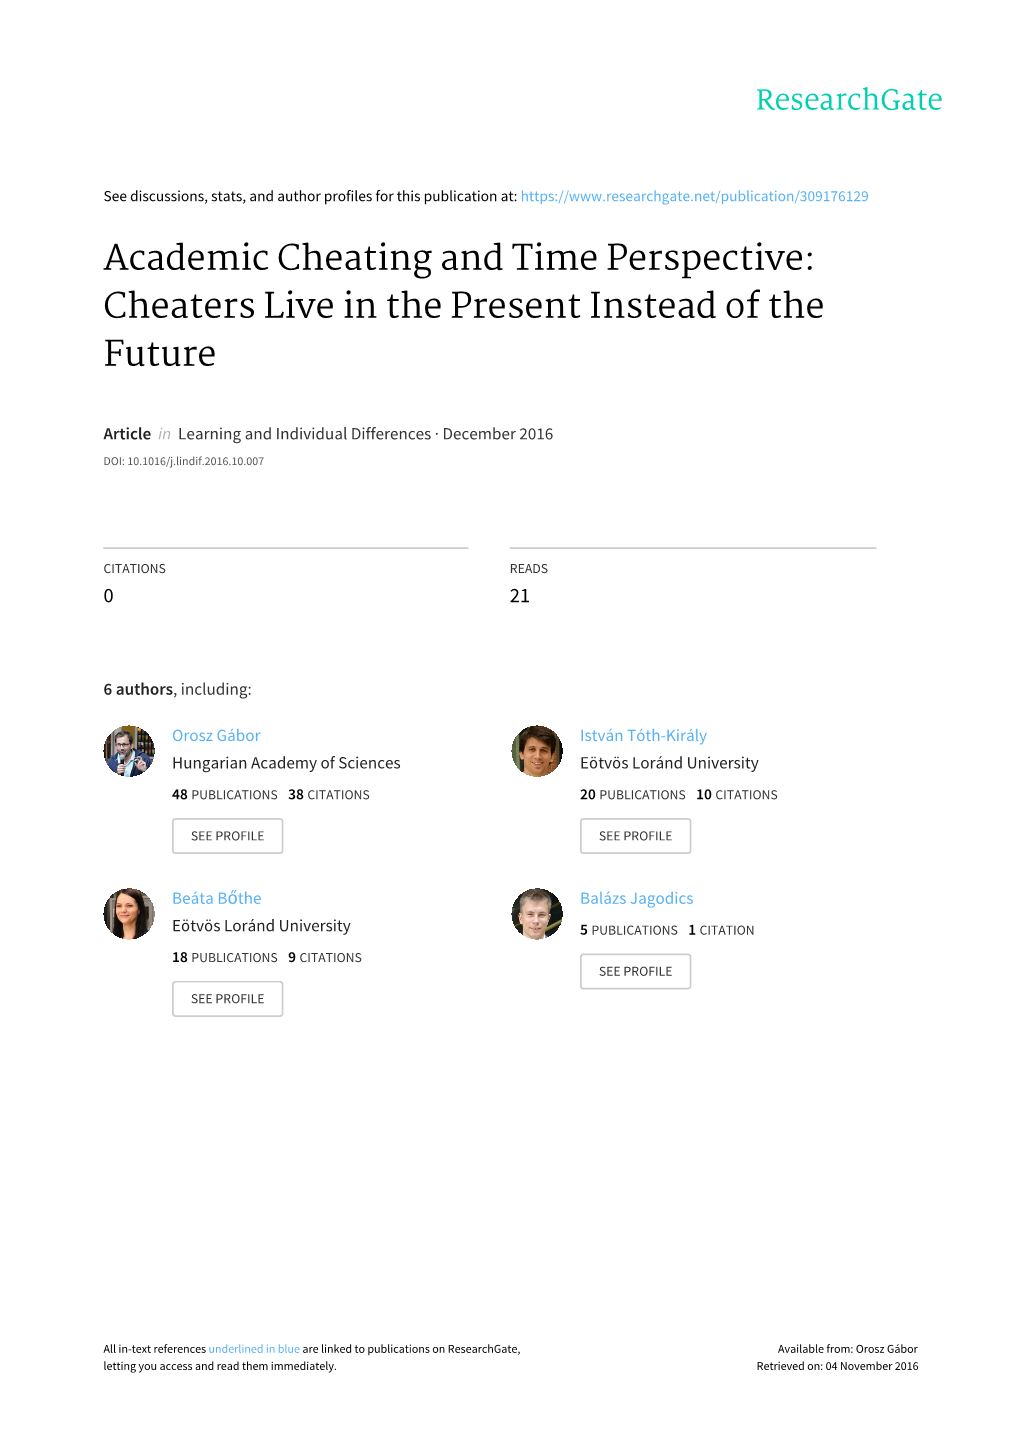 Academic Cheating and Time Perspective: Cheaters Live in the Present Instead of the Future